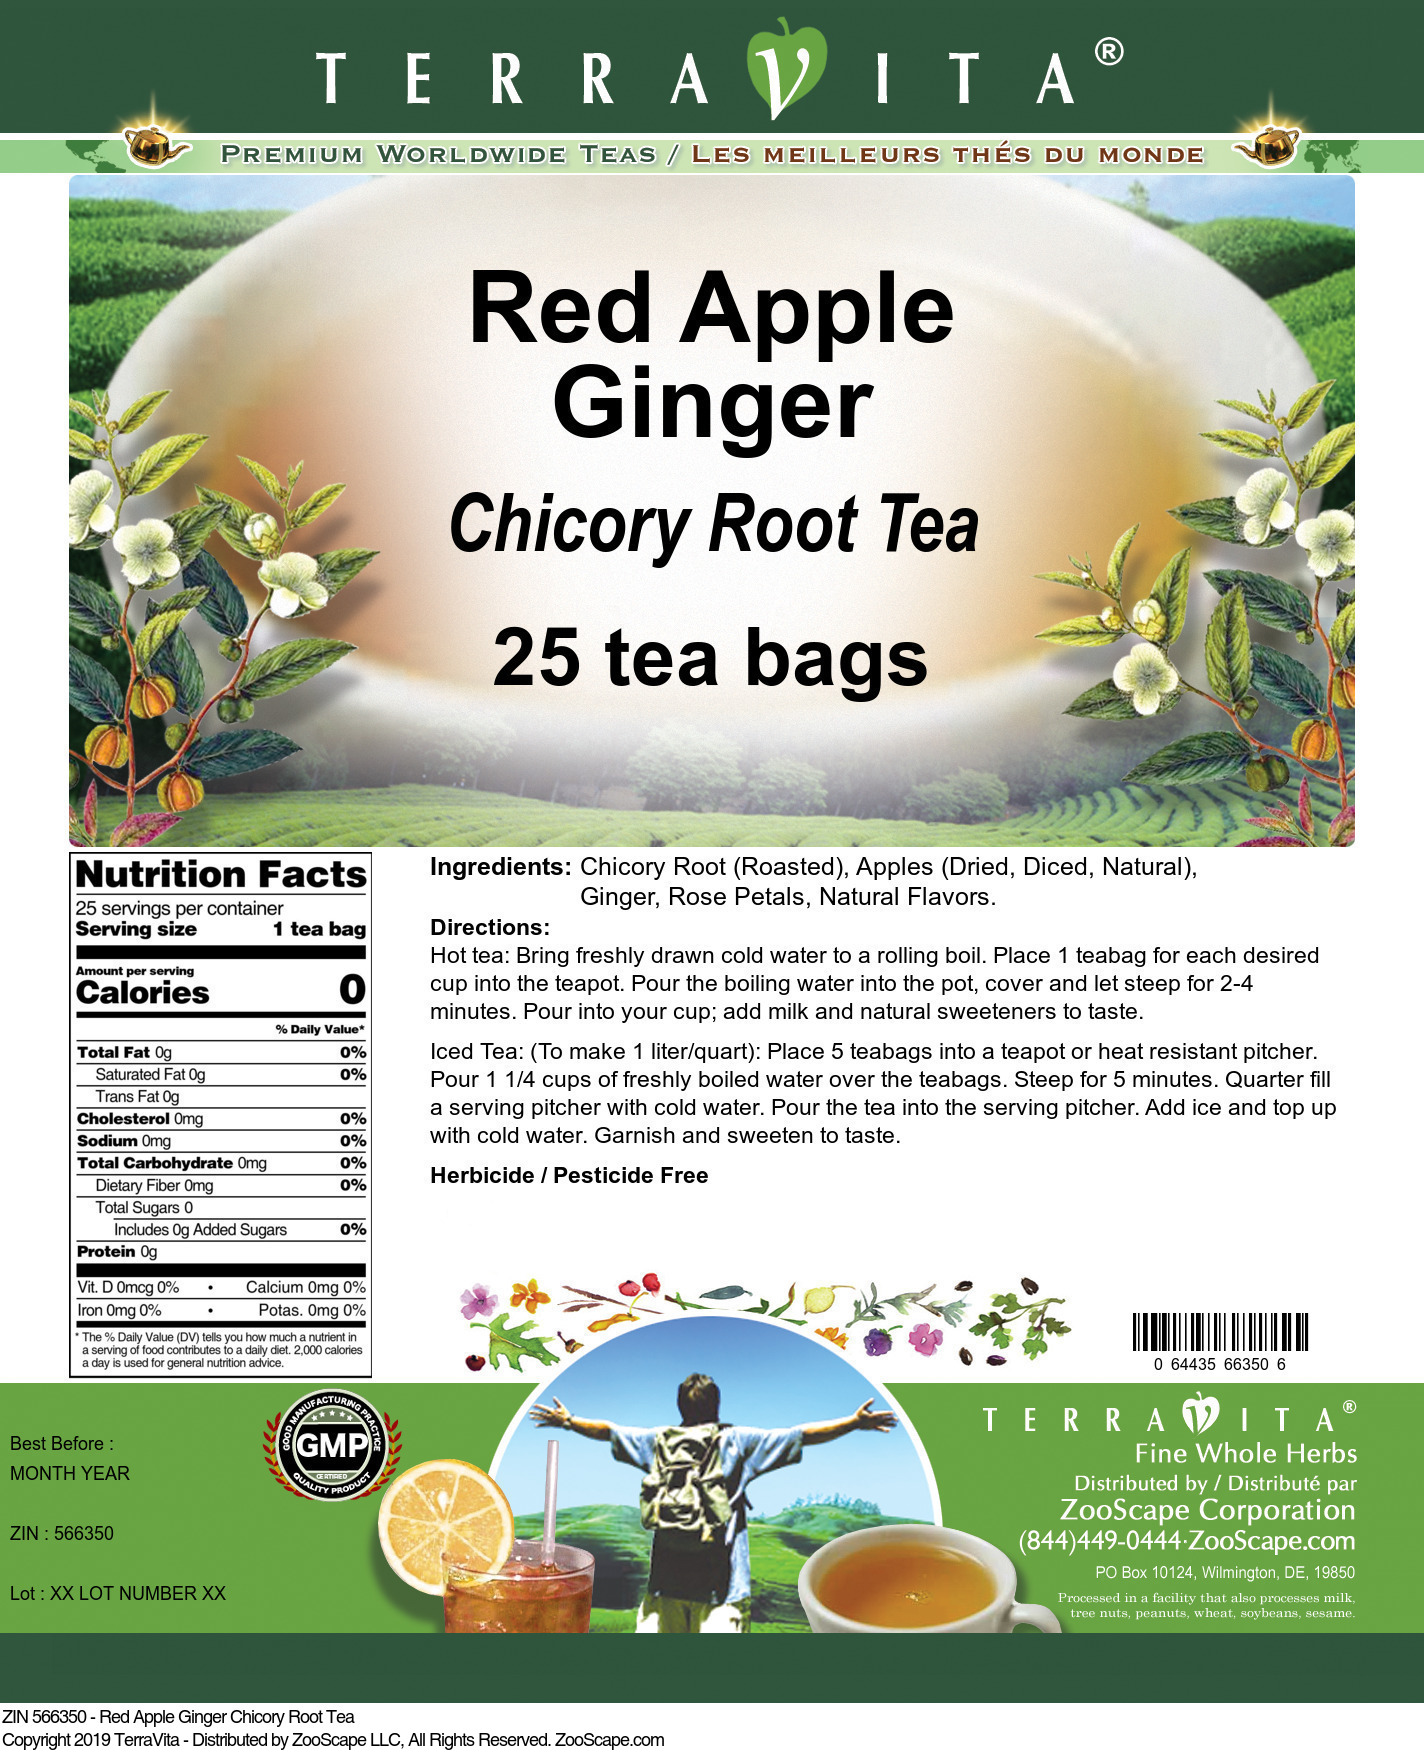 Red Apple Ginger Chicory Root Tea - Label